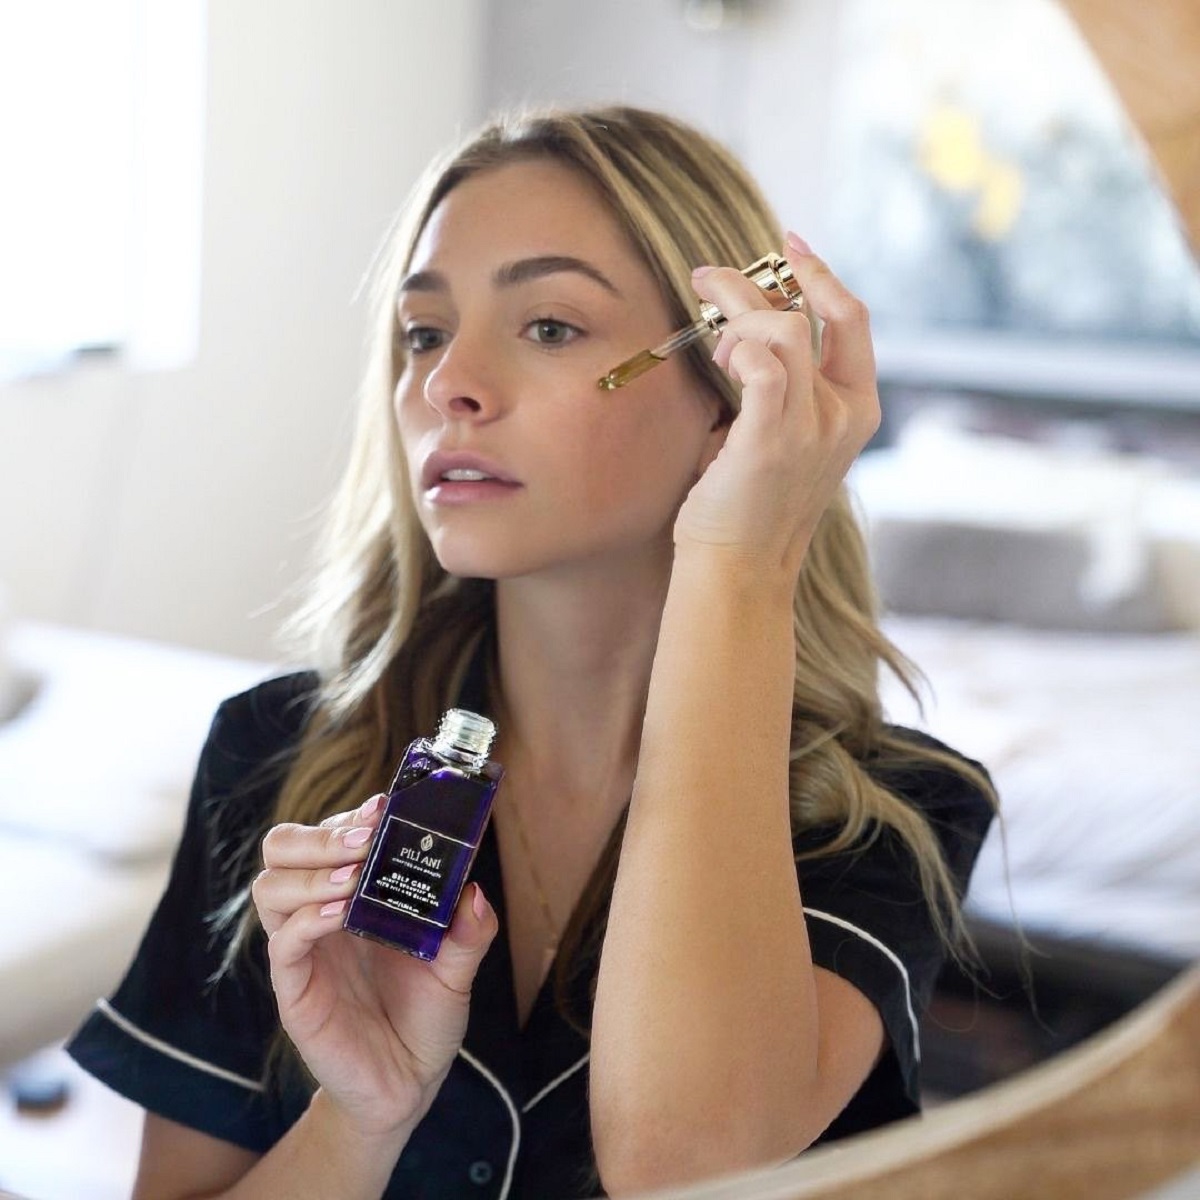 22 Of The Best Beauty Products For Healthy Skin That Glows